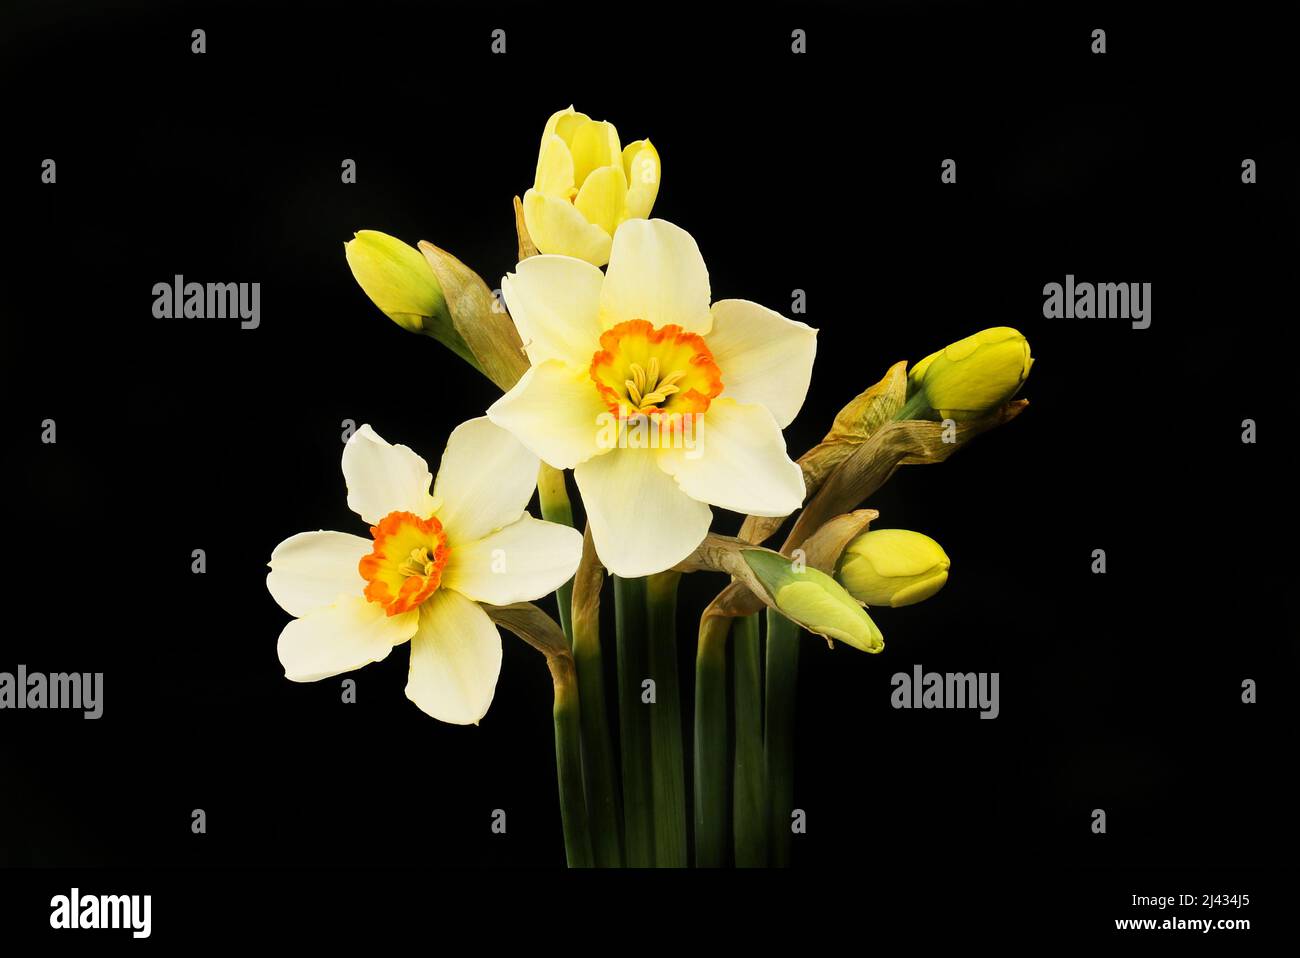 Pheasant's eye daffodil, Narcissus poeticus, flowers and buds isolated against black Stock Photo